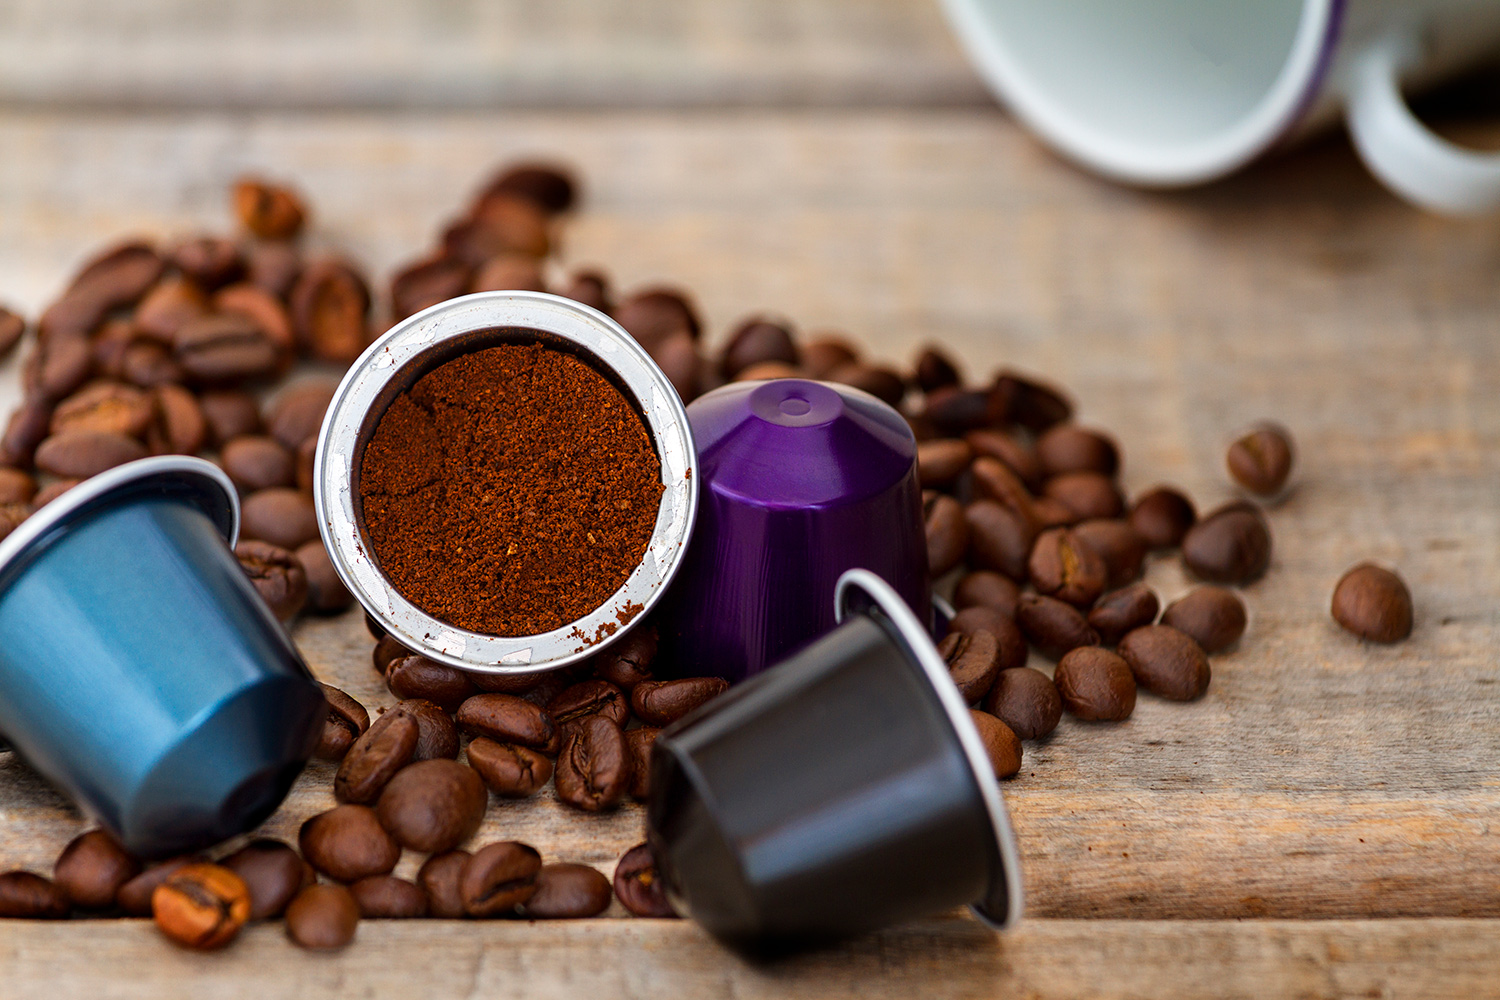 Keurig Vs Standard Coffee Makers: Which Is More Affordable?